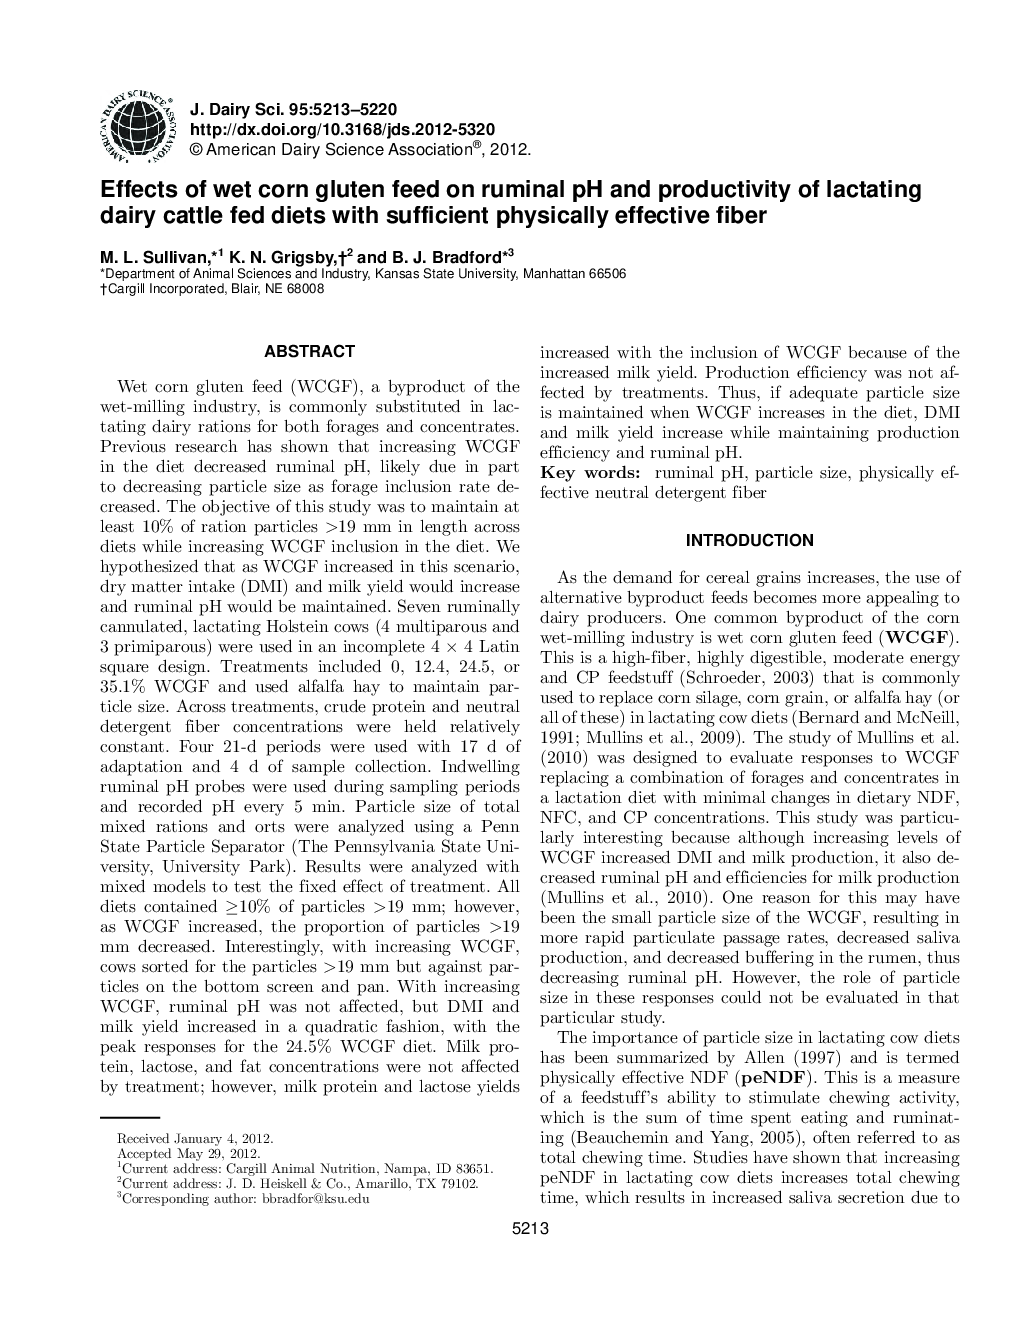 Effects of wet corn gluten feed on ruminal pH and productivity of lactating dairy cattle fed diets with sufficient physically effective fiber